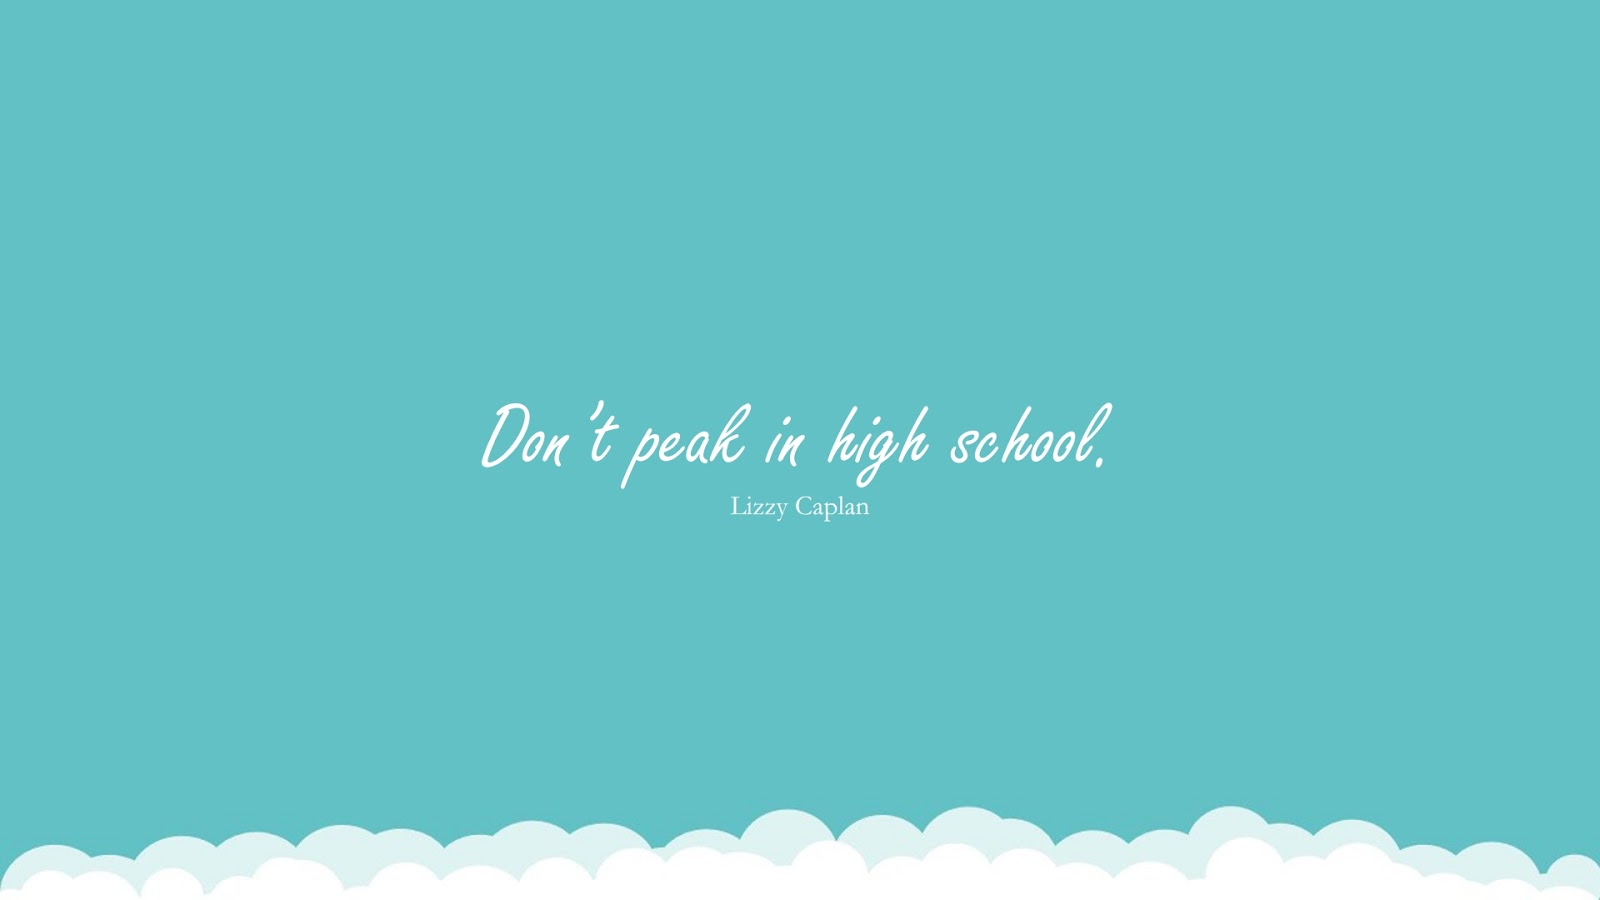 Don’t peak in high school. (Lizzy Caplan);  #EducationQuotes